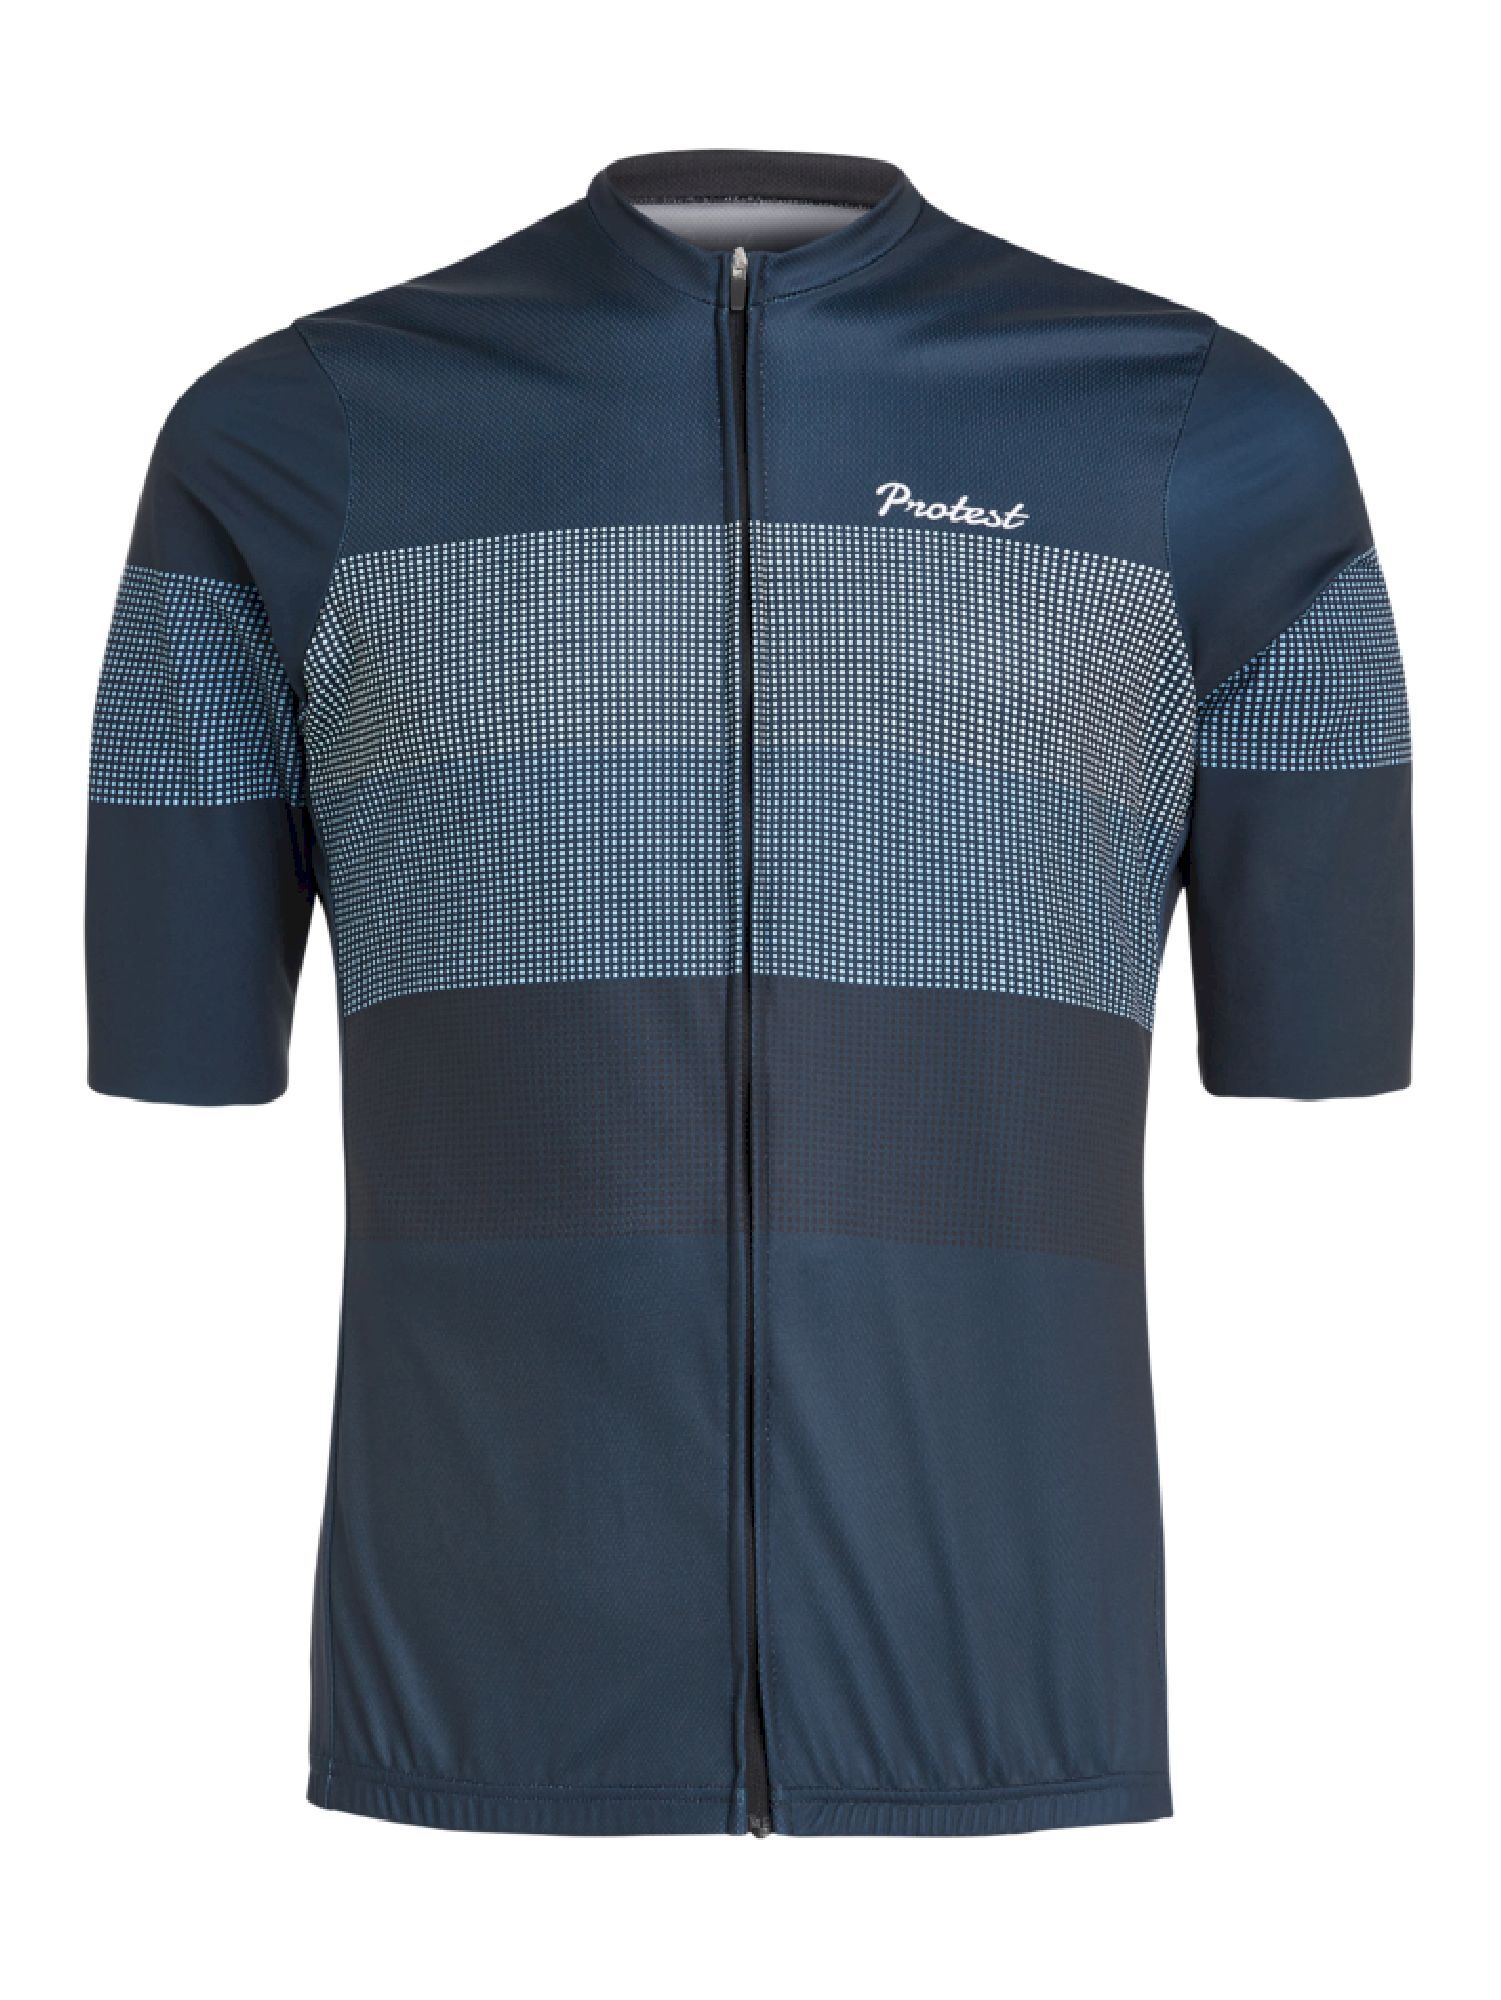 Protest Prtaimar - Maillot ciclismo - Hombre | Hardloop